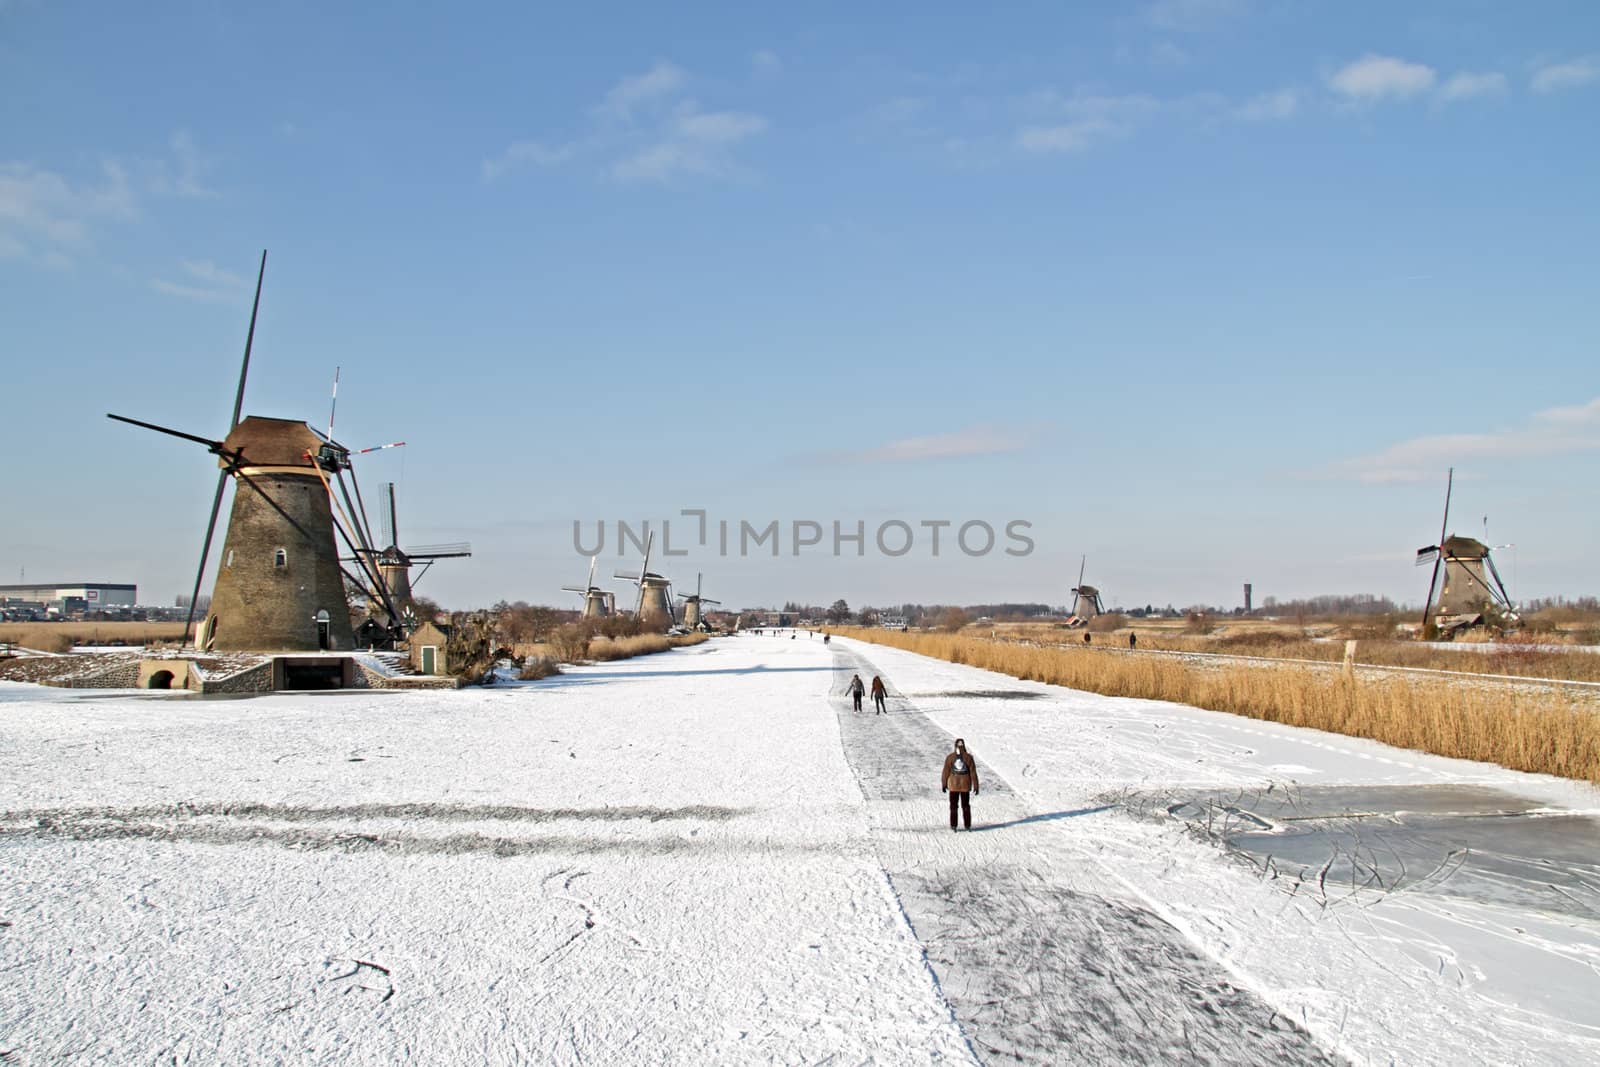 Ice skating at Kinderdijk in the winter in the Netherlands